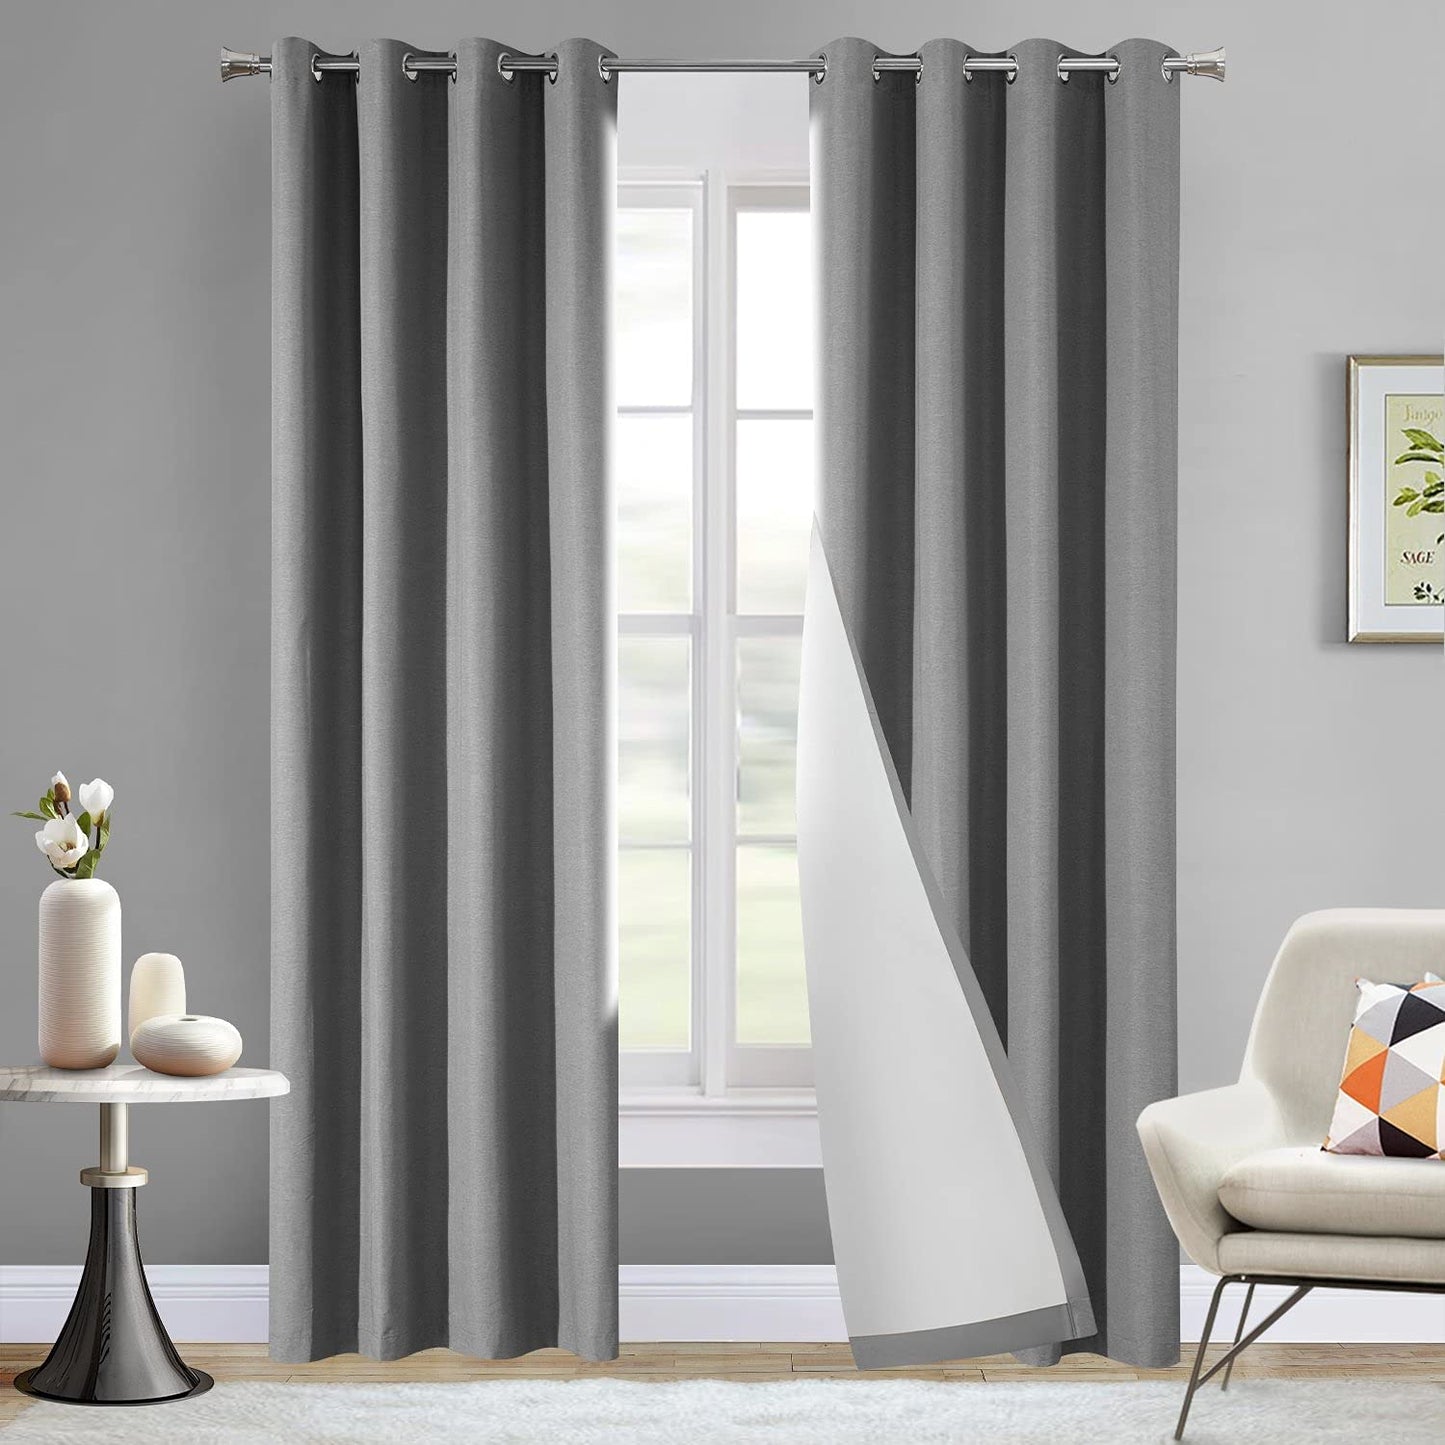 LOYOLADY Dark Grey Blackout Curtains 102 Inches Long 2 Panels Set Thermal Insulated Curtains for Living Room Grommet Noise Reduce Curtains for Bedroom 52" W X 102" L  LoyoLady Home Textiles Dark Grey 100 Blackout Curtains, Grommet 2 X ( 72" W X 84" L ) 